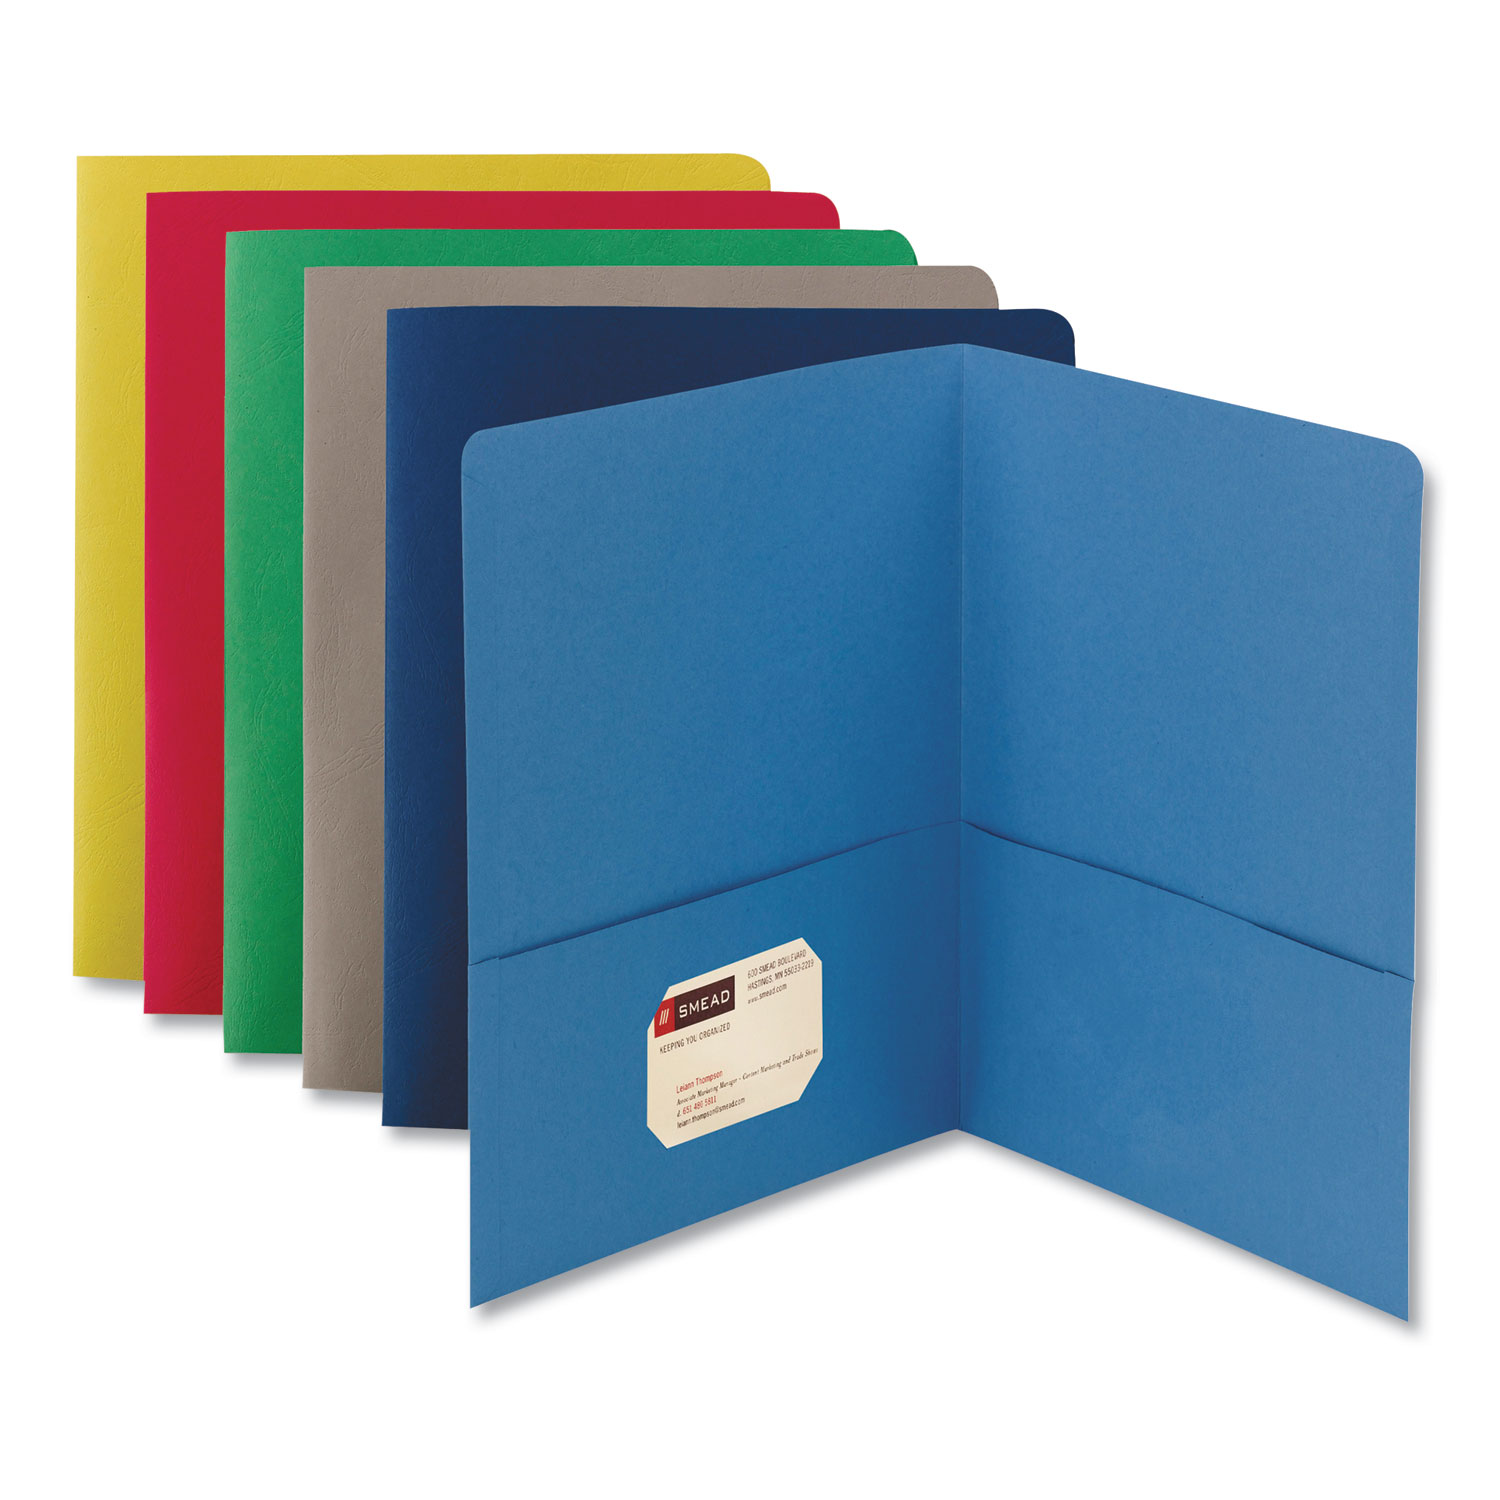 25 per Box Assorted 25-Count Two-Pocket Folders Light Blue, Green, Yellow, Orange and Red 